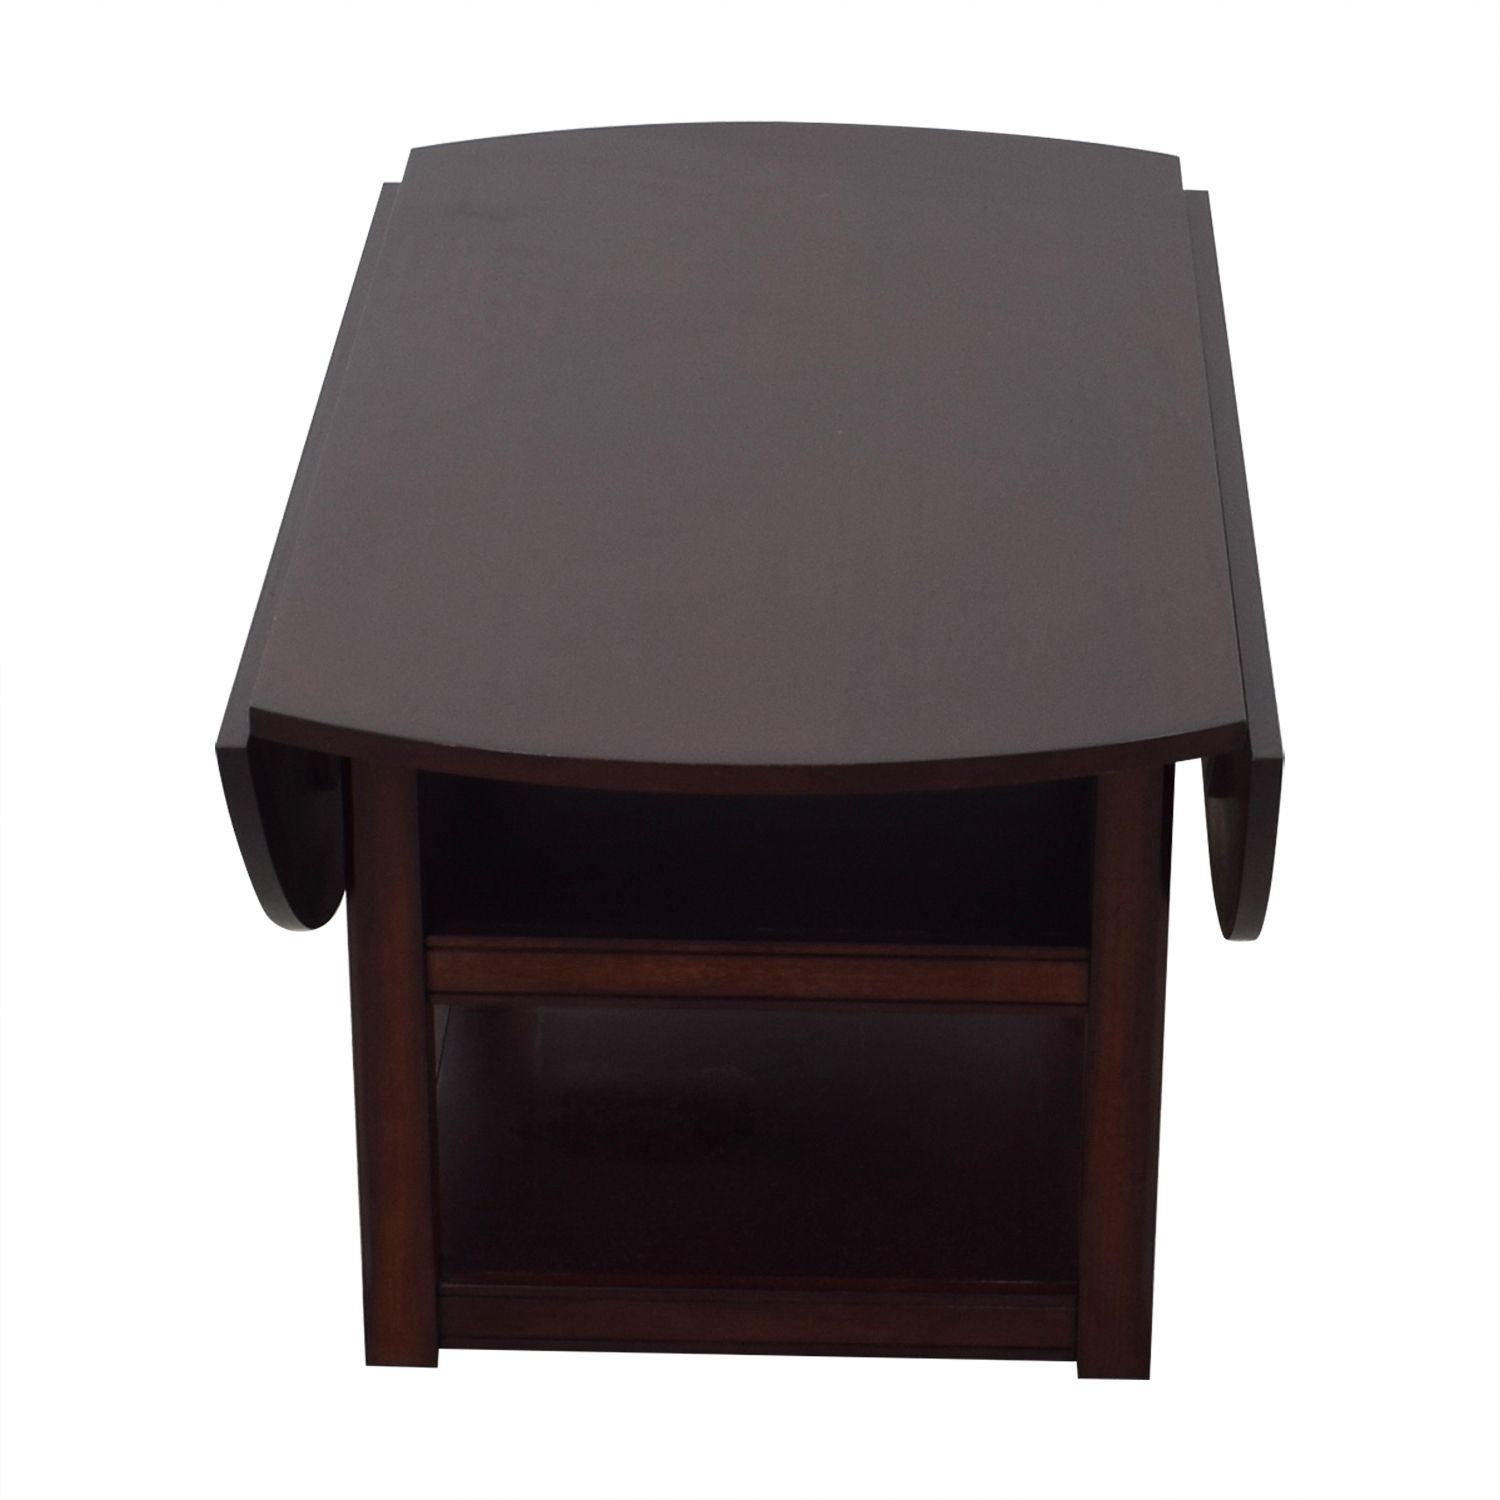 [%44% Off – Pottery Barn Pottery Barn Shayne Drop Leaf Kitchen Table / Tables Within Most Popular Black Shayne Drop Leaf Kitchen Tables|black Shayne Drop Leaf Kitchen Tables With Most Recent 44% Off – Pottery Barn Pottery Barn Shayne Drop Leaf Kitchen Table / Tables|well Known Black Shayne Drop Leaf Kitchen Tables For 44% Off – Pottery Barn Pottery Barn Shayne Drop Leaf Kitchen Table / Tables|favorite 44% Off – Pottery Barn Pottery Barn Shayne Drop Leaf Kitchen Table / Tables Pertaining To Black Shayne Drop Leaf Kitchen Tables%] (View 12 of 25)